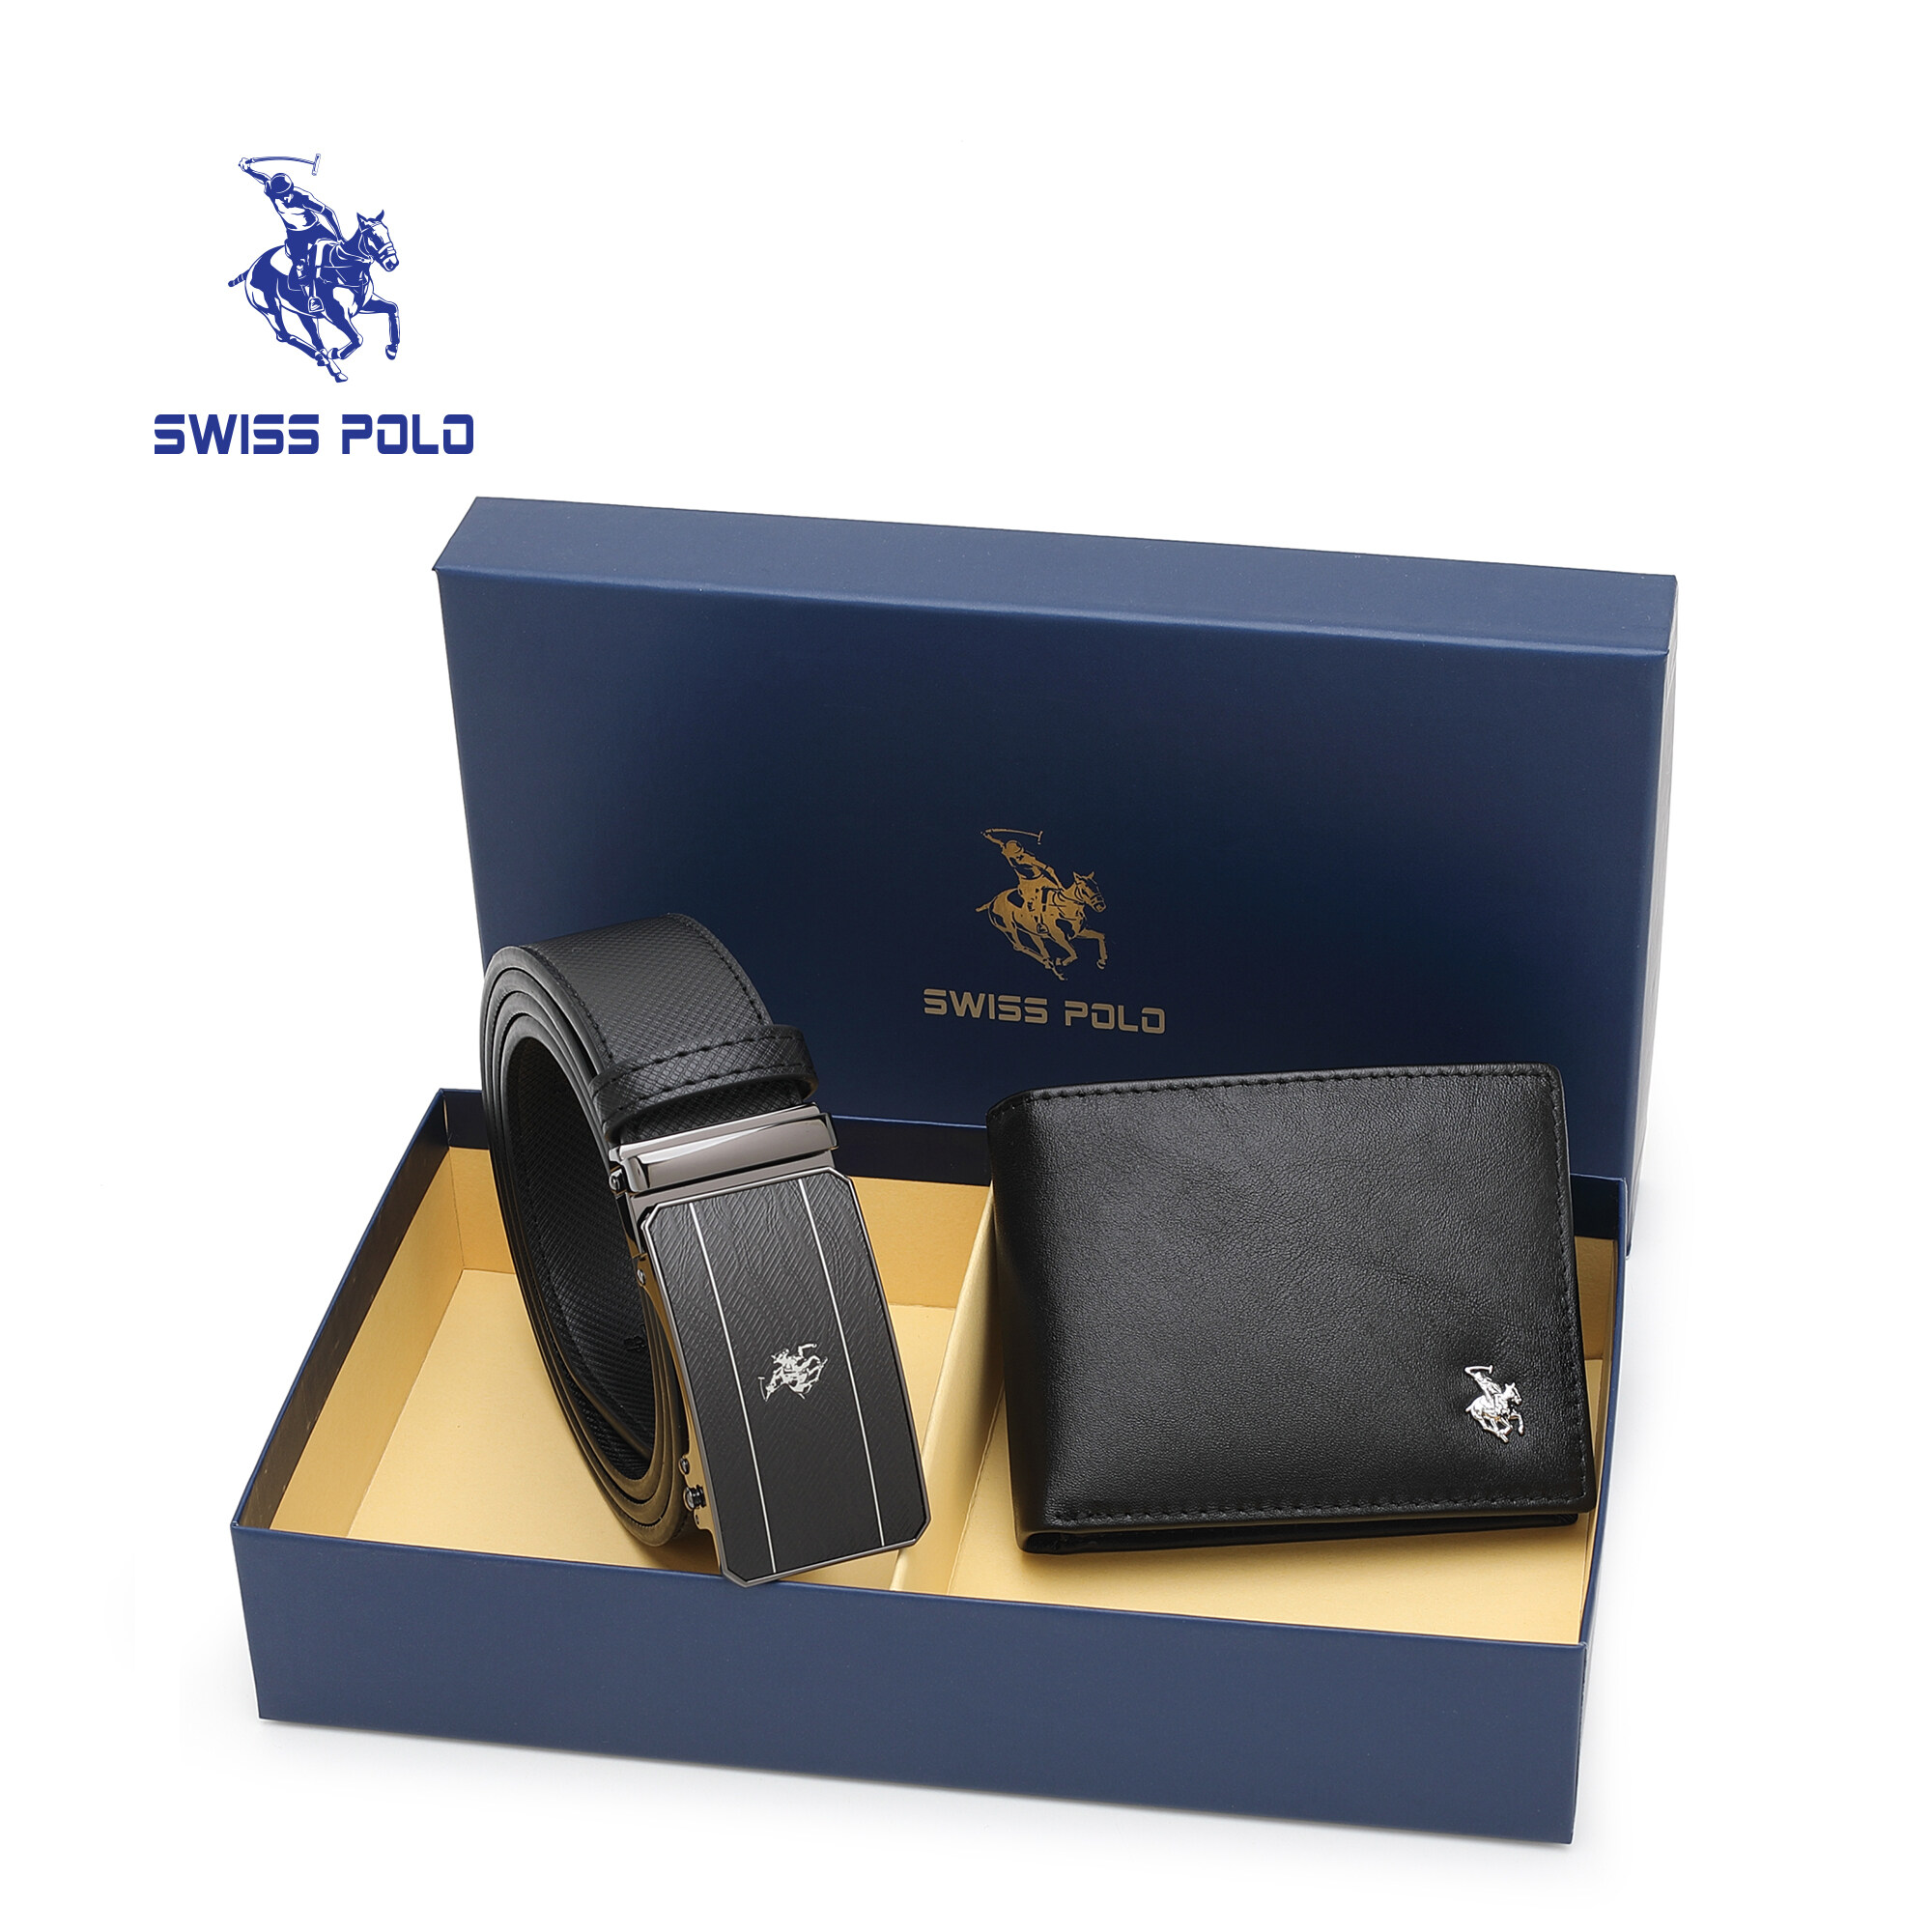 SWISS POLO Gift Set/ Box Wallet With Belt SGS 568-3 BLUE